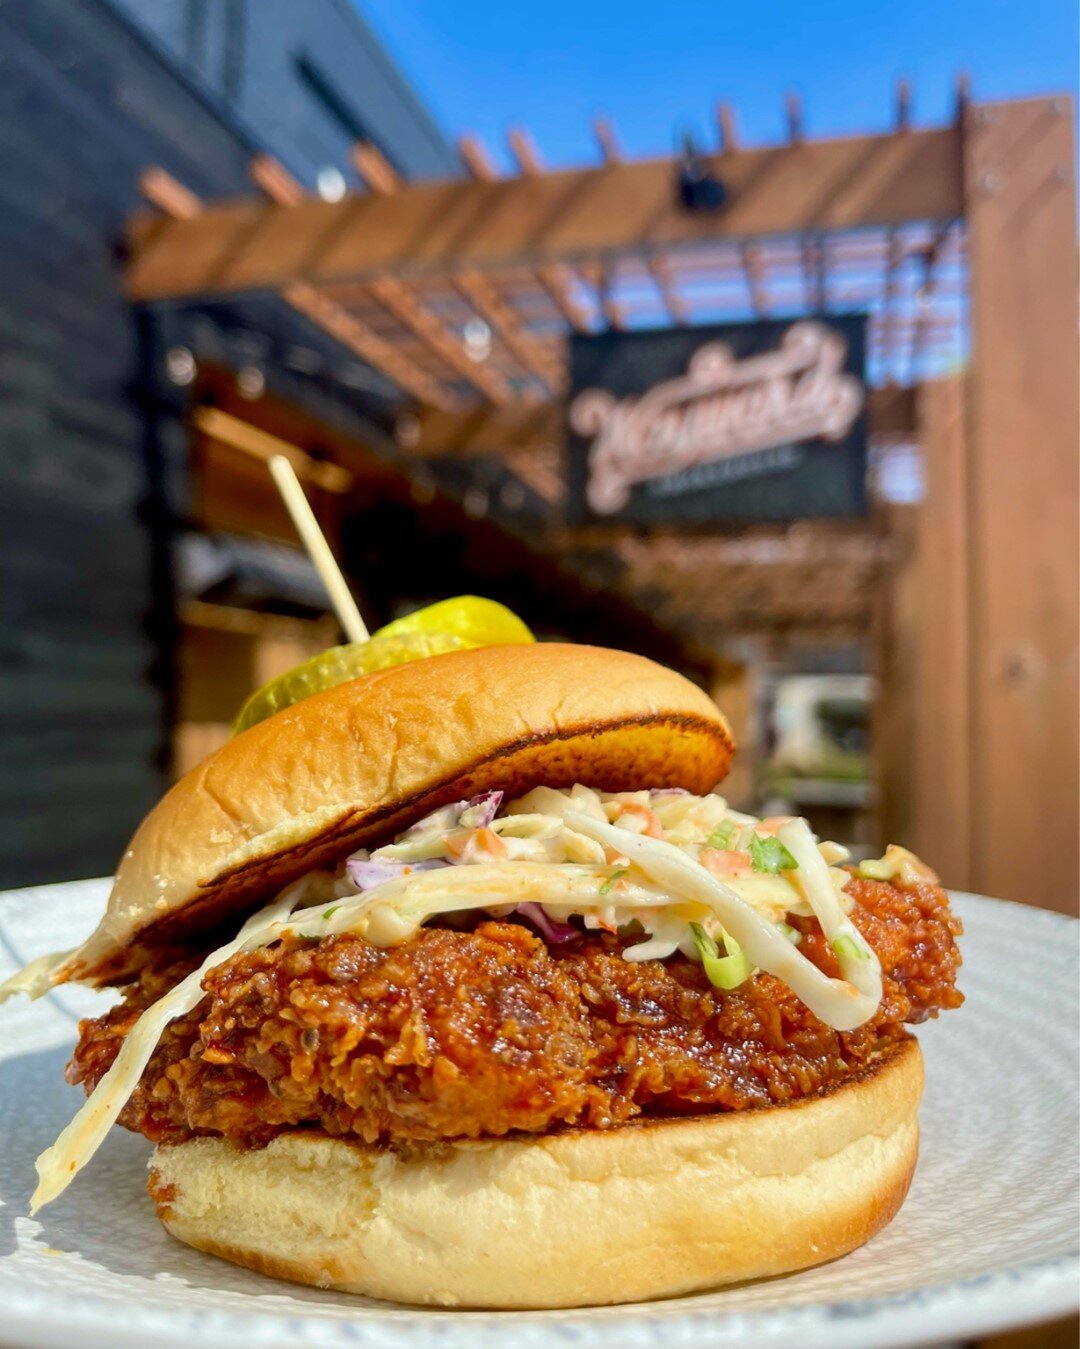 Happy Fri-YAY, my friends!
🎉
And you know what that means!? NEW FEATURE FRIDAY!
🎉
Korean Fried Chicken Sandwich
👉🏽 Fried Chicken Thigh
👉🏽 Korean BBQ
👉🏽 Asian Slaw
👉🏽 Potato Roll
🎉
This is available AFTER 4️⃣pm so make sure to get yourself 